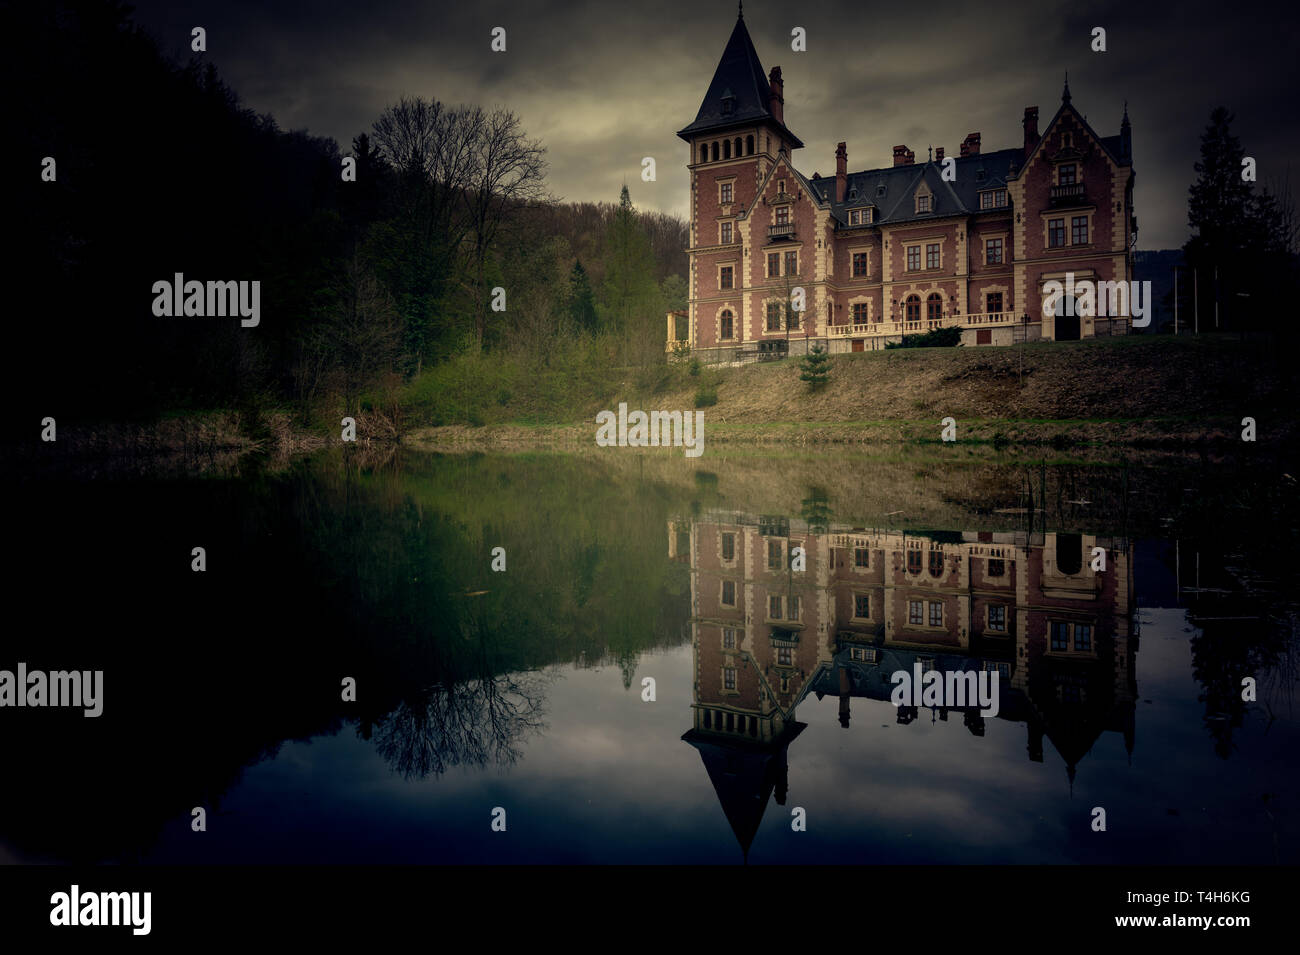 Scary view of a castle with a lake and reflection in the creepy forest Stock Photo